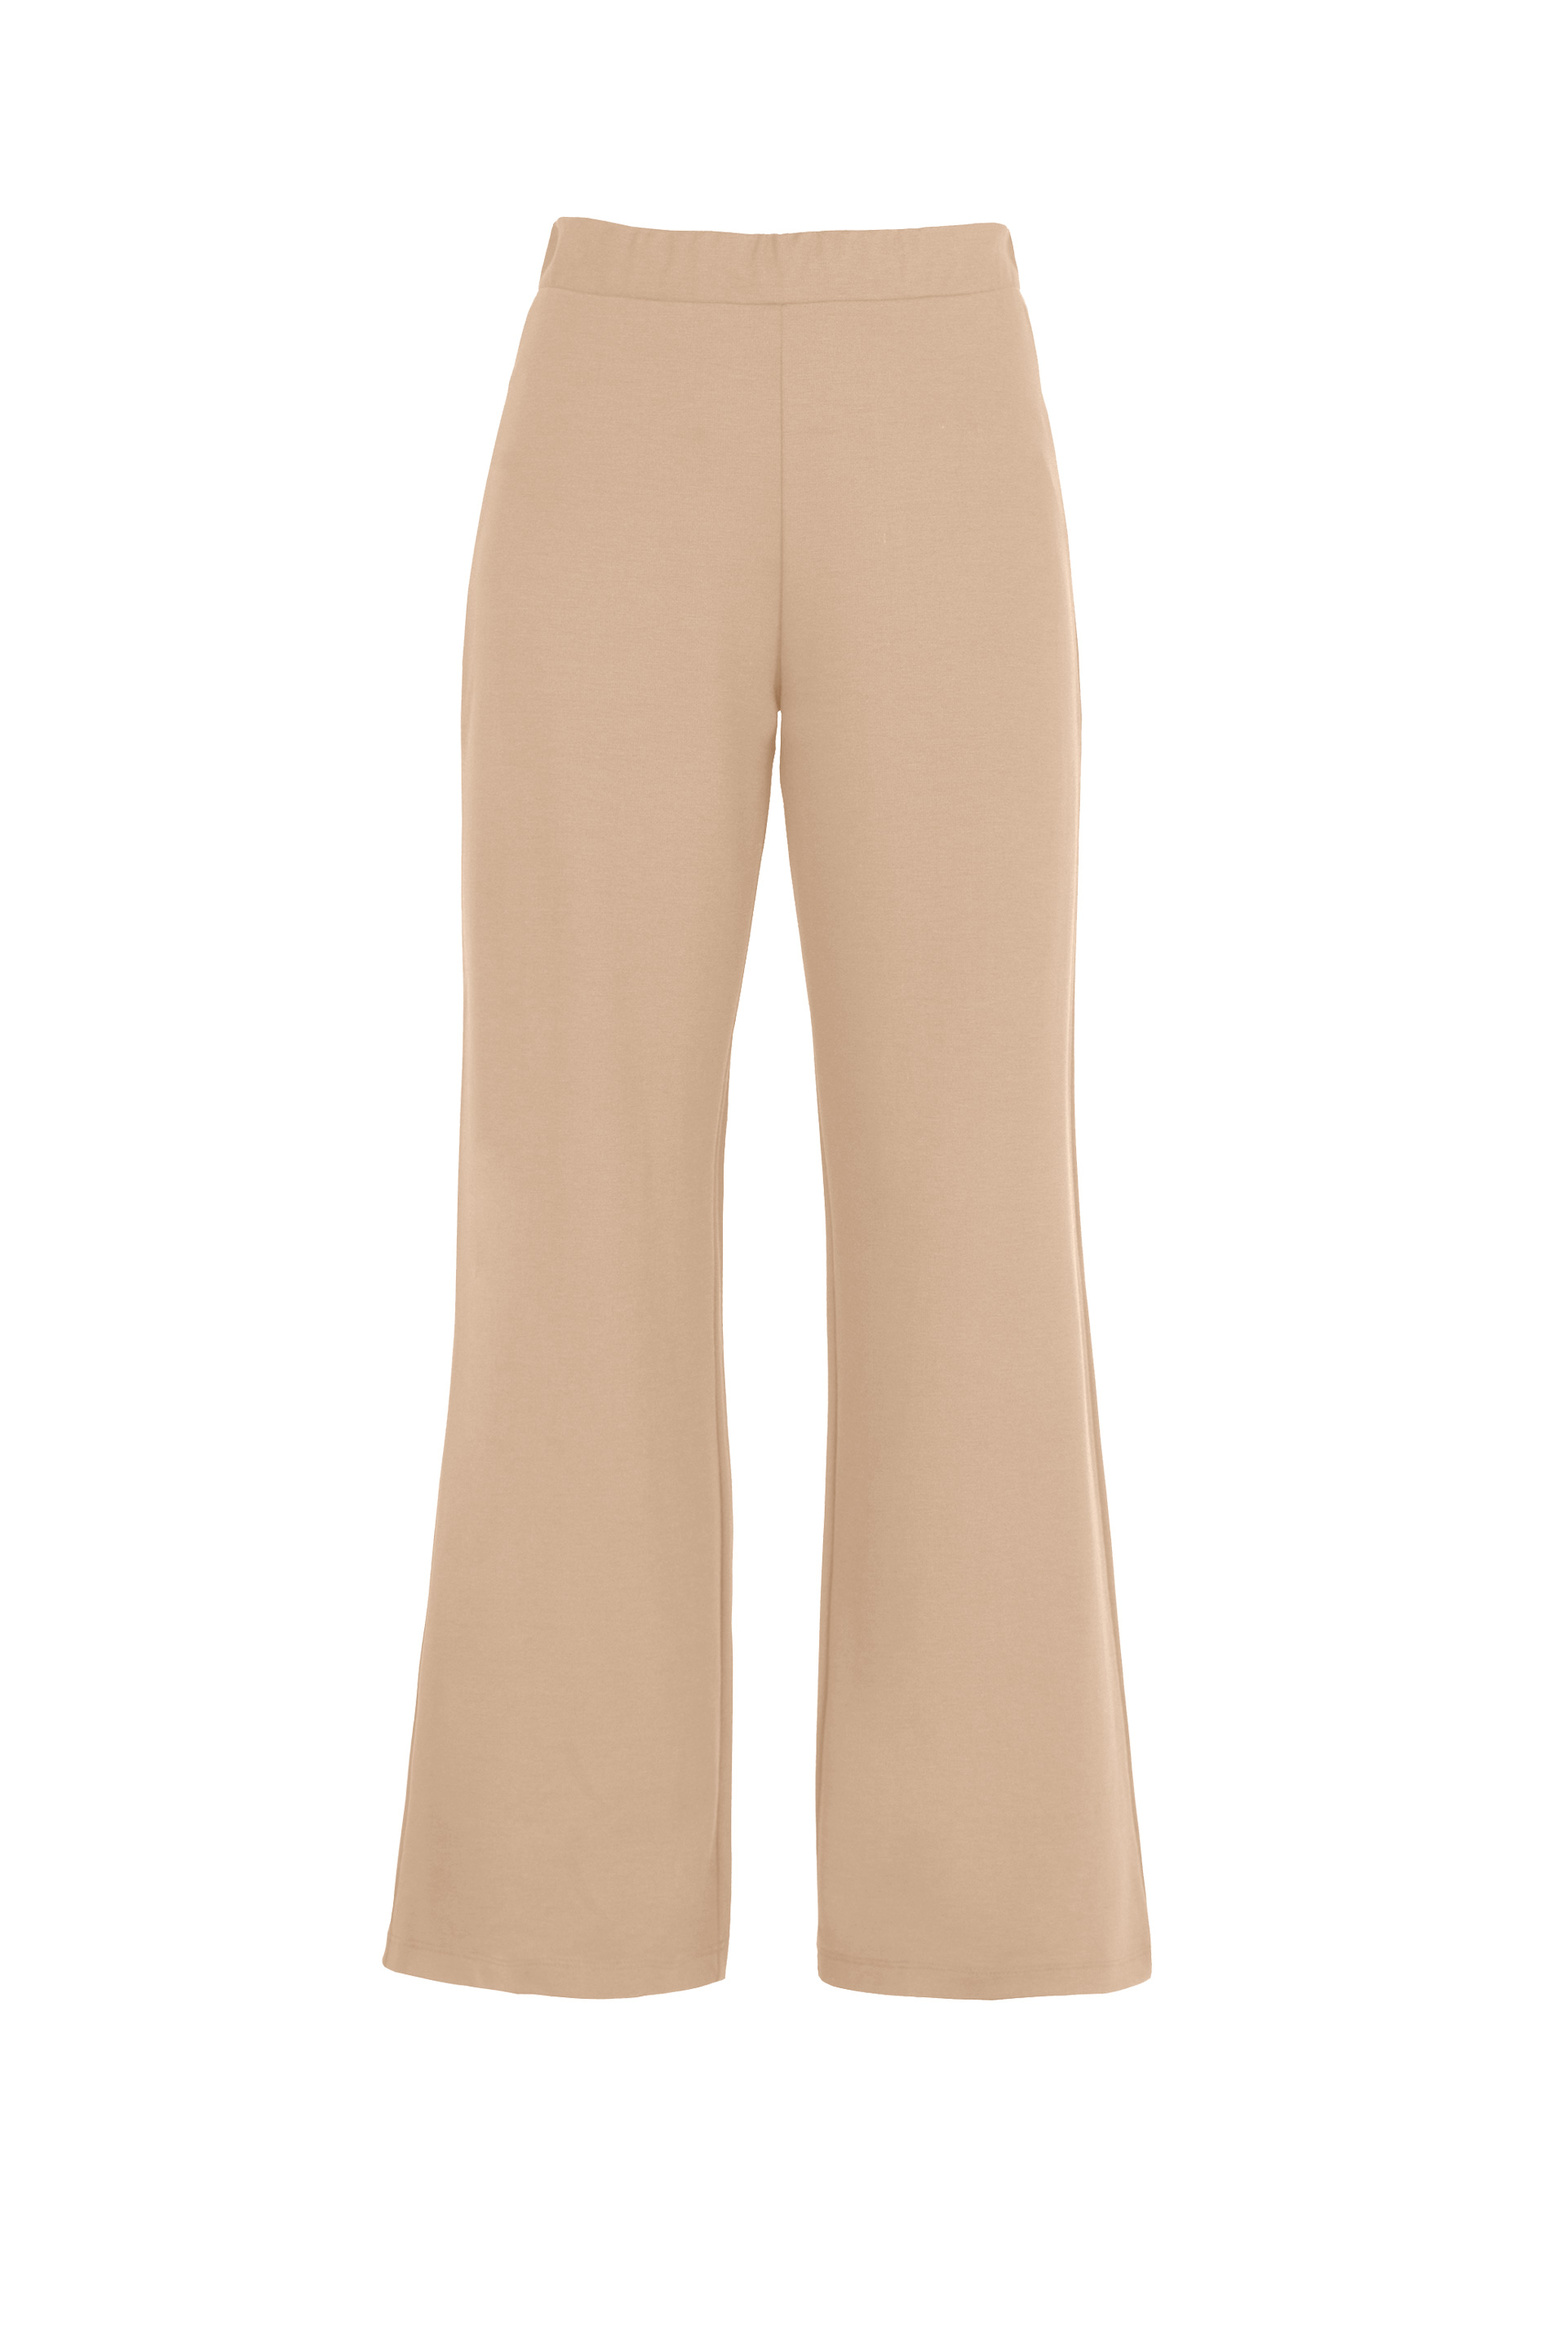 42757_wide-ponte-trousers_soft_camel.jpg